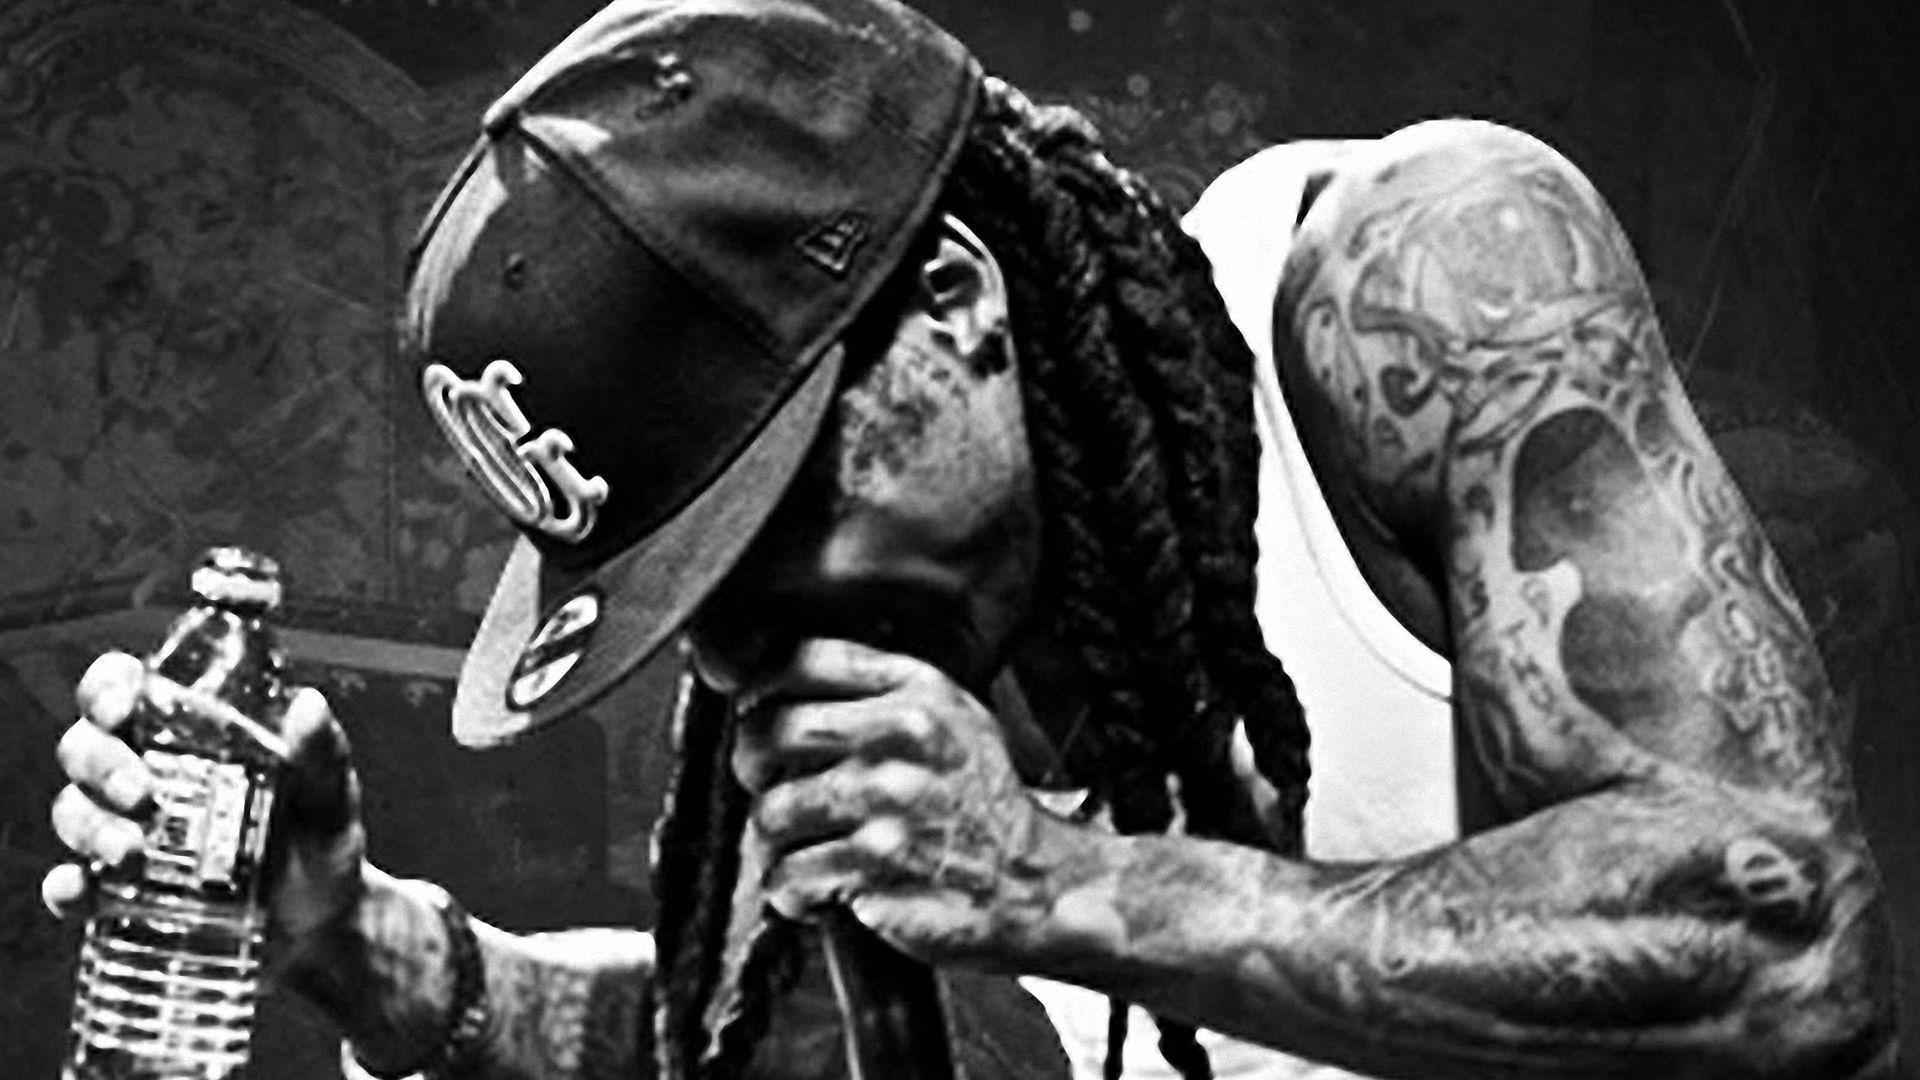 Wayne 1920x1080: High Definition Wallpapers for desktop and mobile